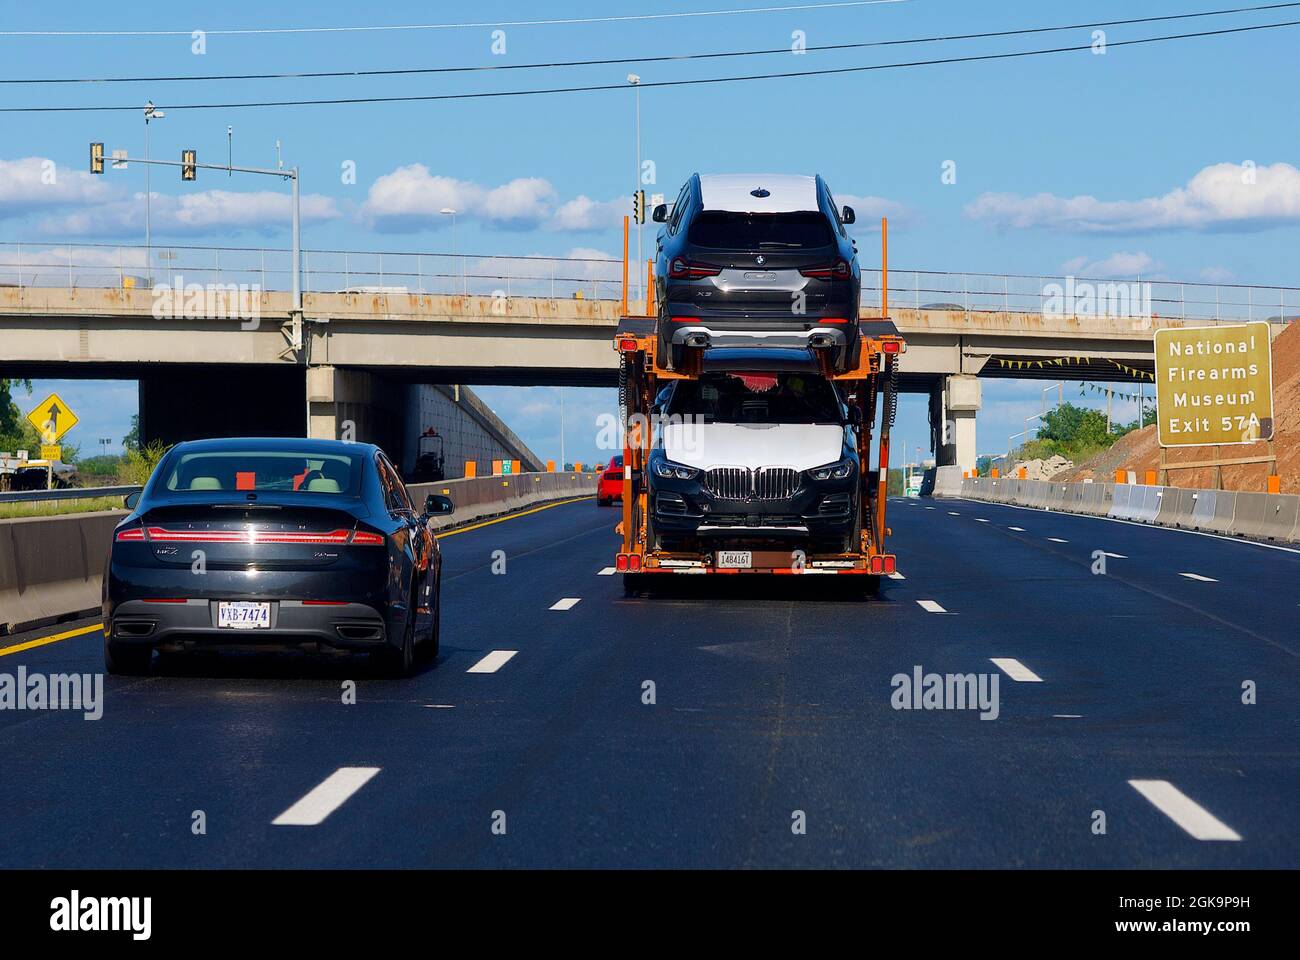 Fairfax County, Virginia, USA - September 3, 2021: A vehicle transporter hauls new cars on Interstate 66 near the National Firearms Museum exit. Stock Photo